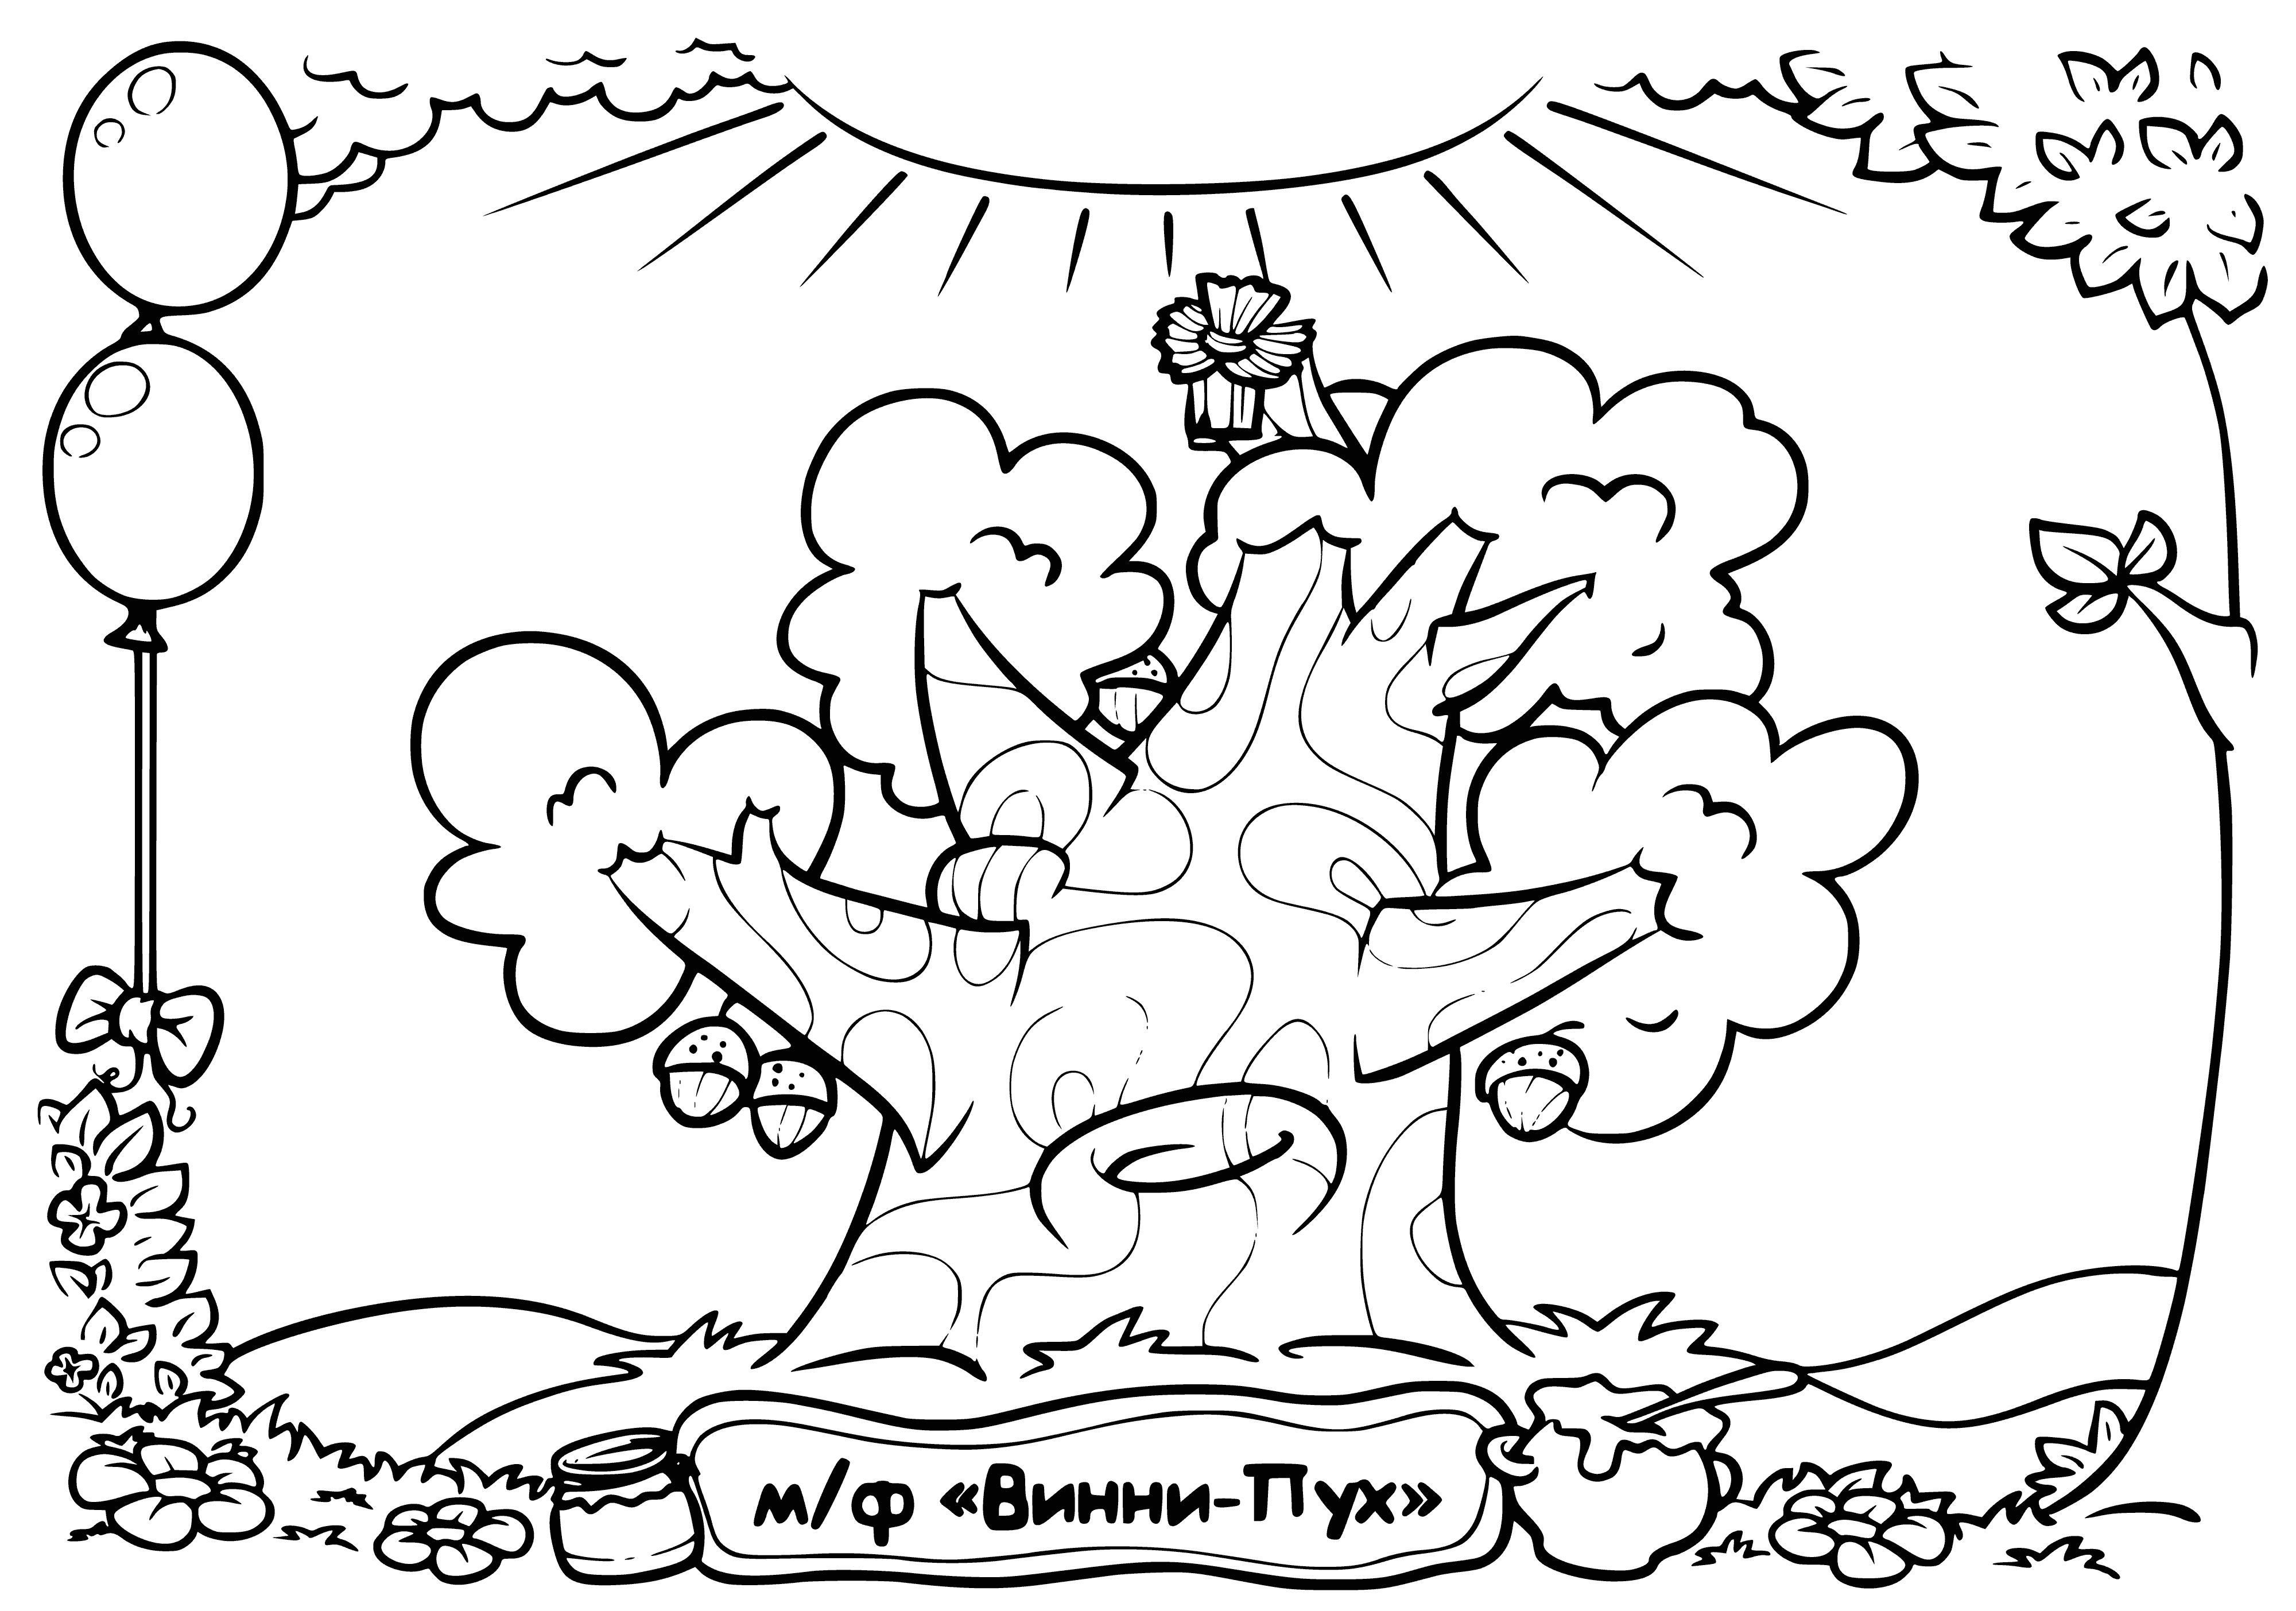 coloring page: A big tree with a hole in it, a ladder, and a wooden house on its platform. Bees, flowers and branches near by.